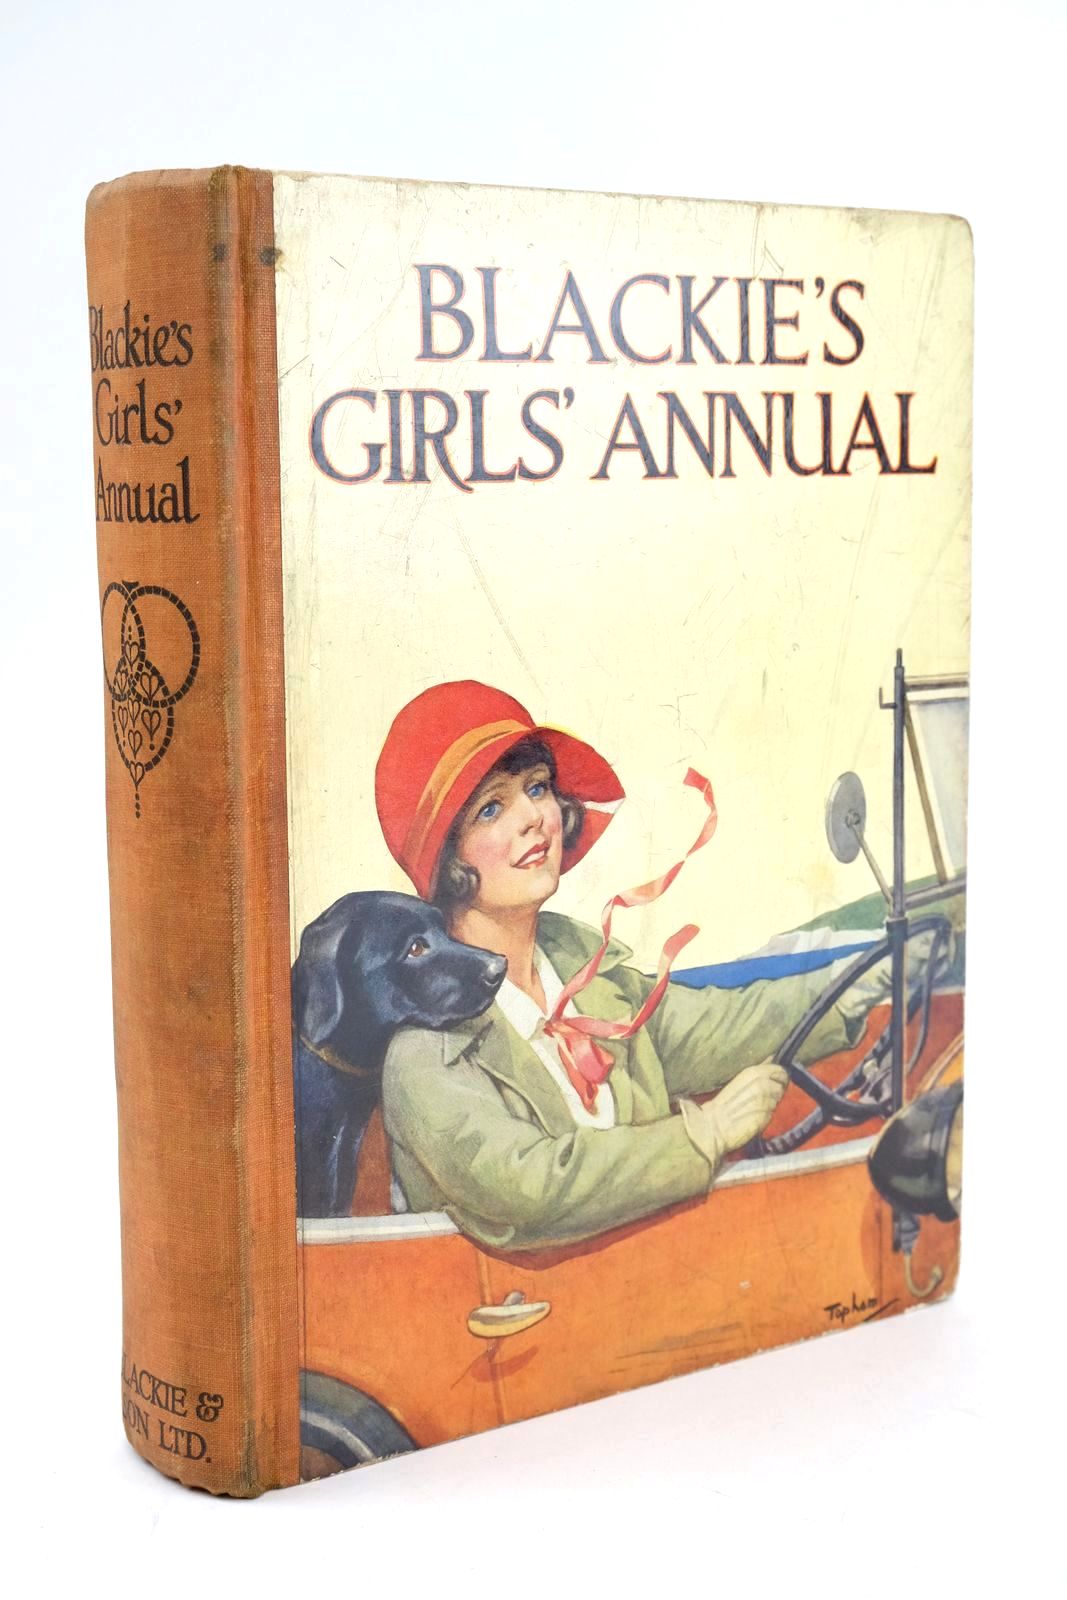 Photo of BLACKIE'S GIRLS' ANNUAL written by Joan, Natalie
Rutley, C. Bernard
Methley, Violet M.
Talbot, Ethel
Buckingham, M.E.
Cobb, Ruth
et al, illustrated by Watson, A.H.
Bestall, Alfred
Brock, C.E.
Cobb, Ruth
Aris, Ernest A.
Topham, Inez
et al., published by Blackie & Son Ltd. (STOCK CODE: 1324980)  for sale by Stella & Rose's Books